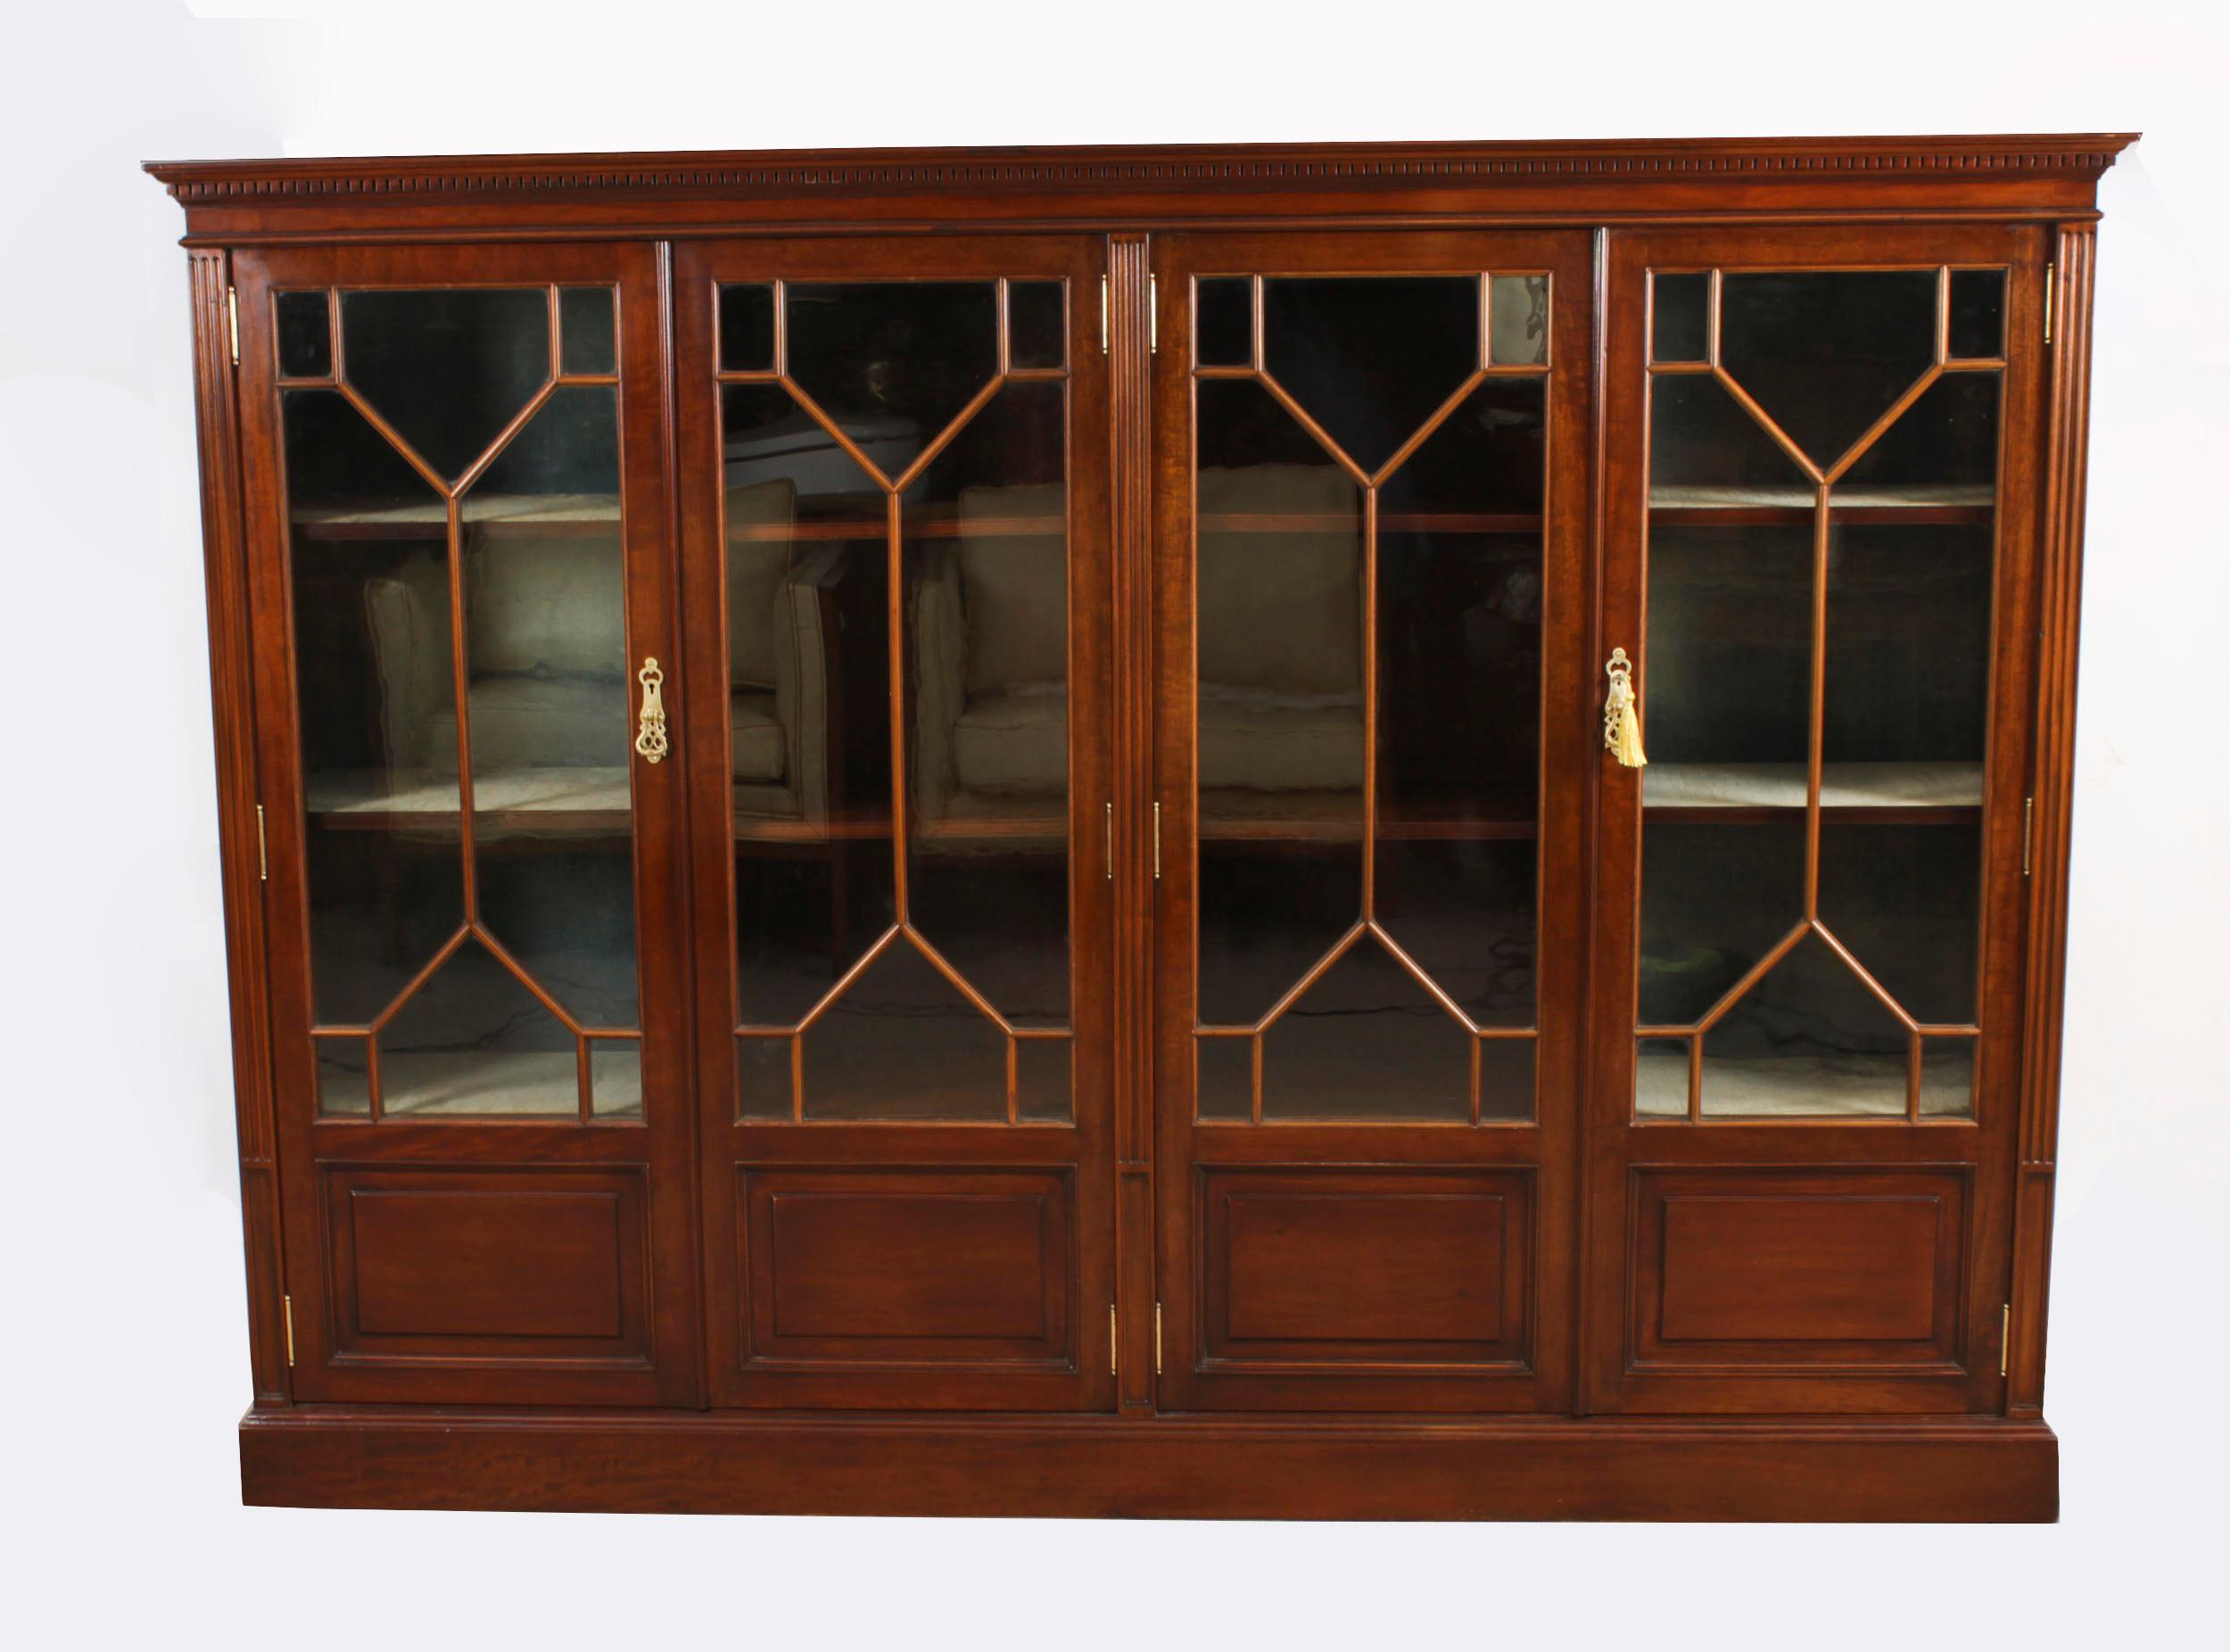 This is a beautiful Edwardian antique mahogany  library bookcase, masterfully crafted in rich solid mahogany, Circa 1900 in date.

The bookcase features  a stepped and cavetto cornice over four astragal glazed doors, the lower part of each is